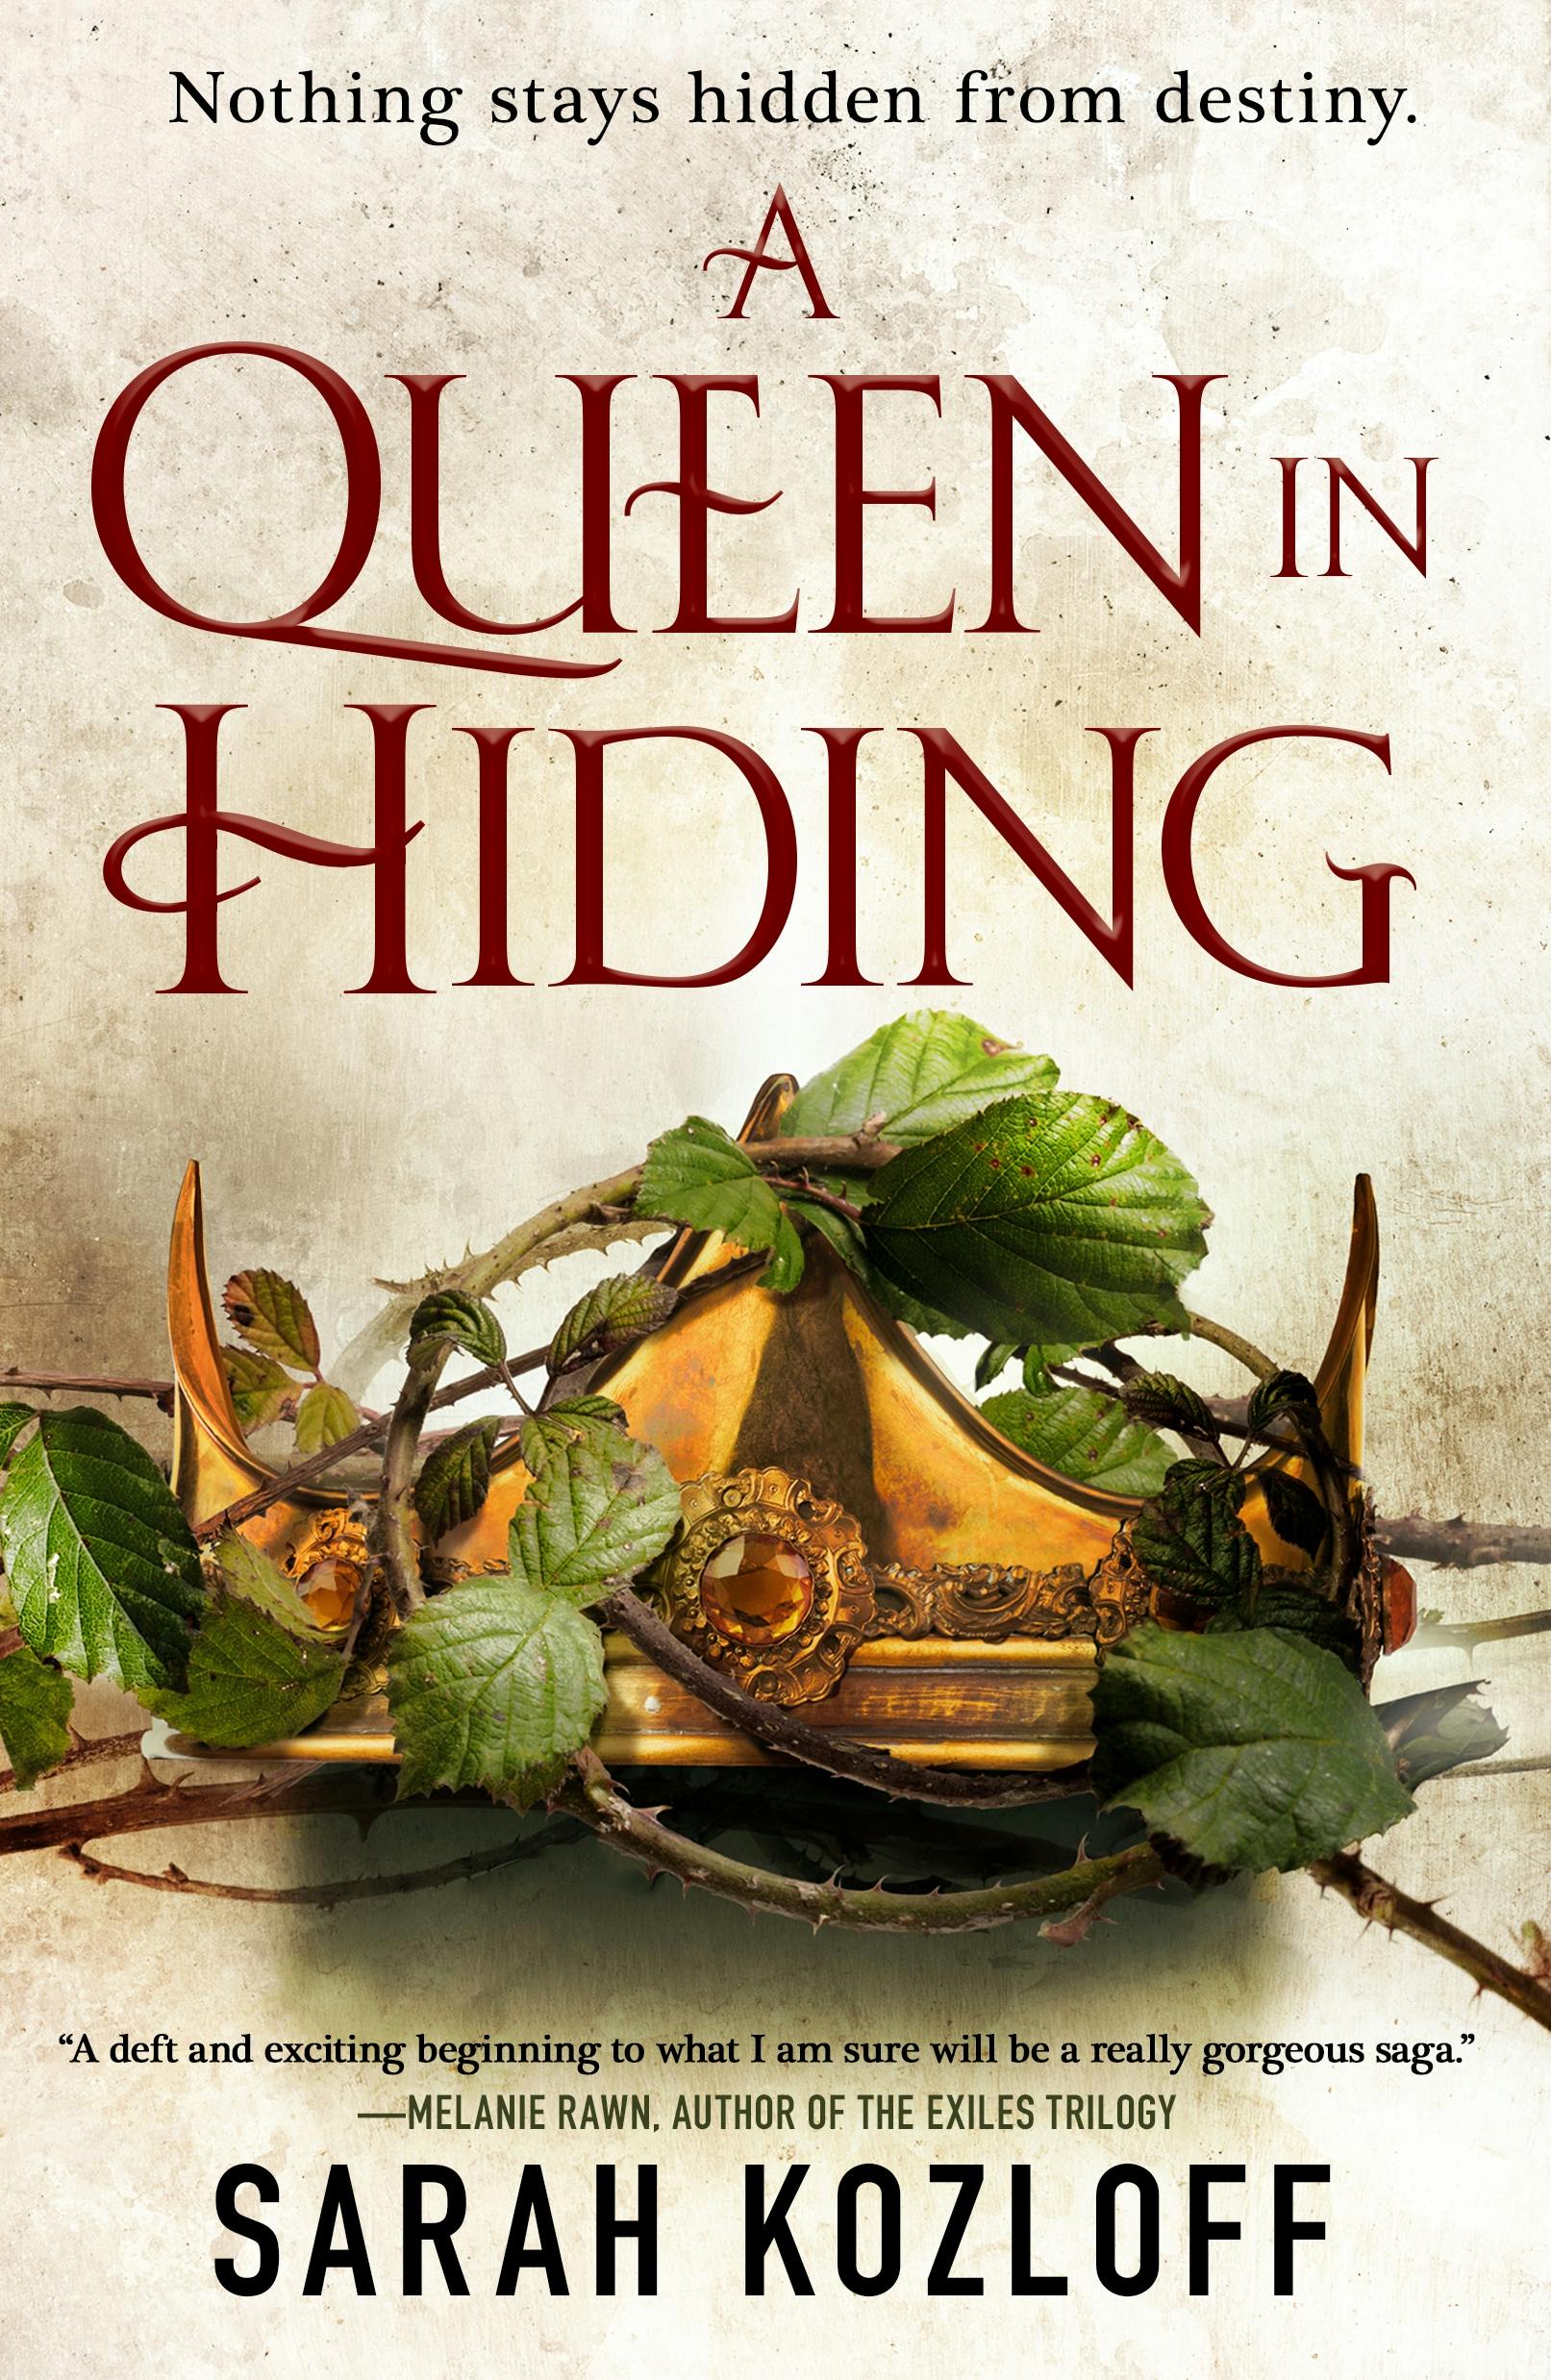 Cover for the book titled as: A Queen in Hiding